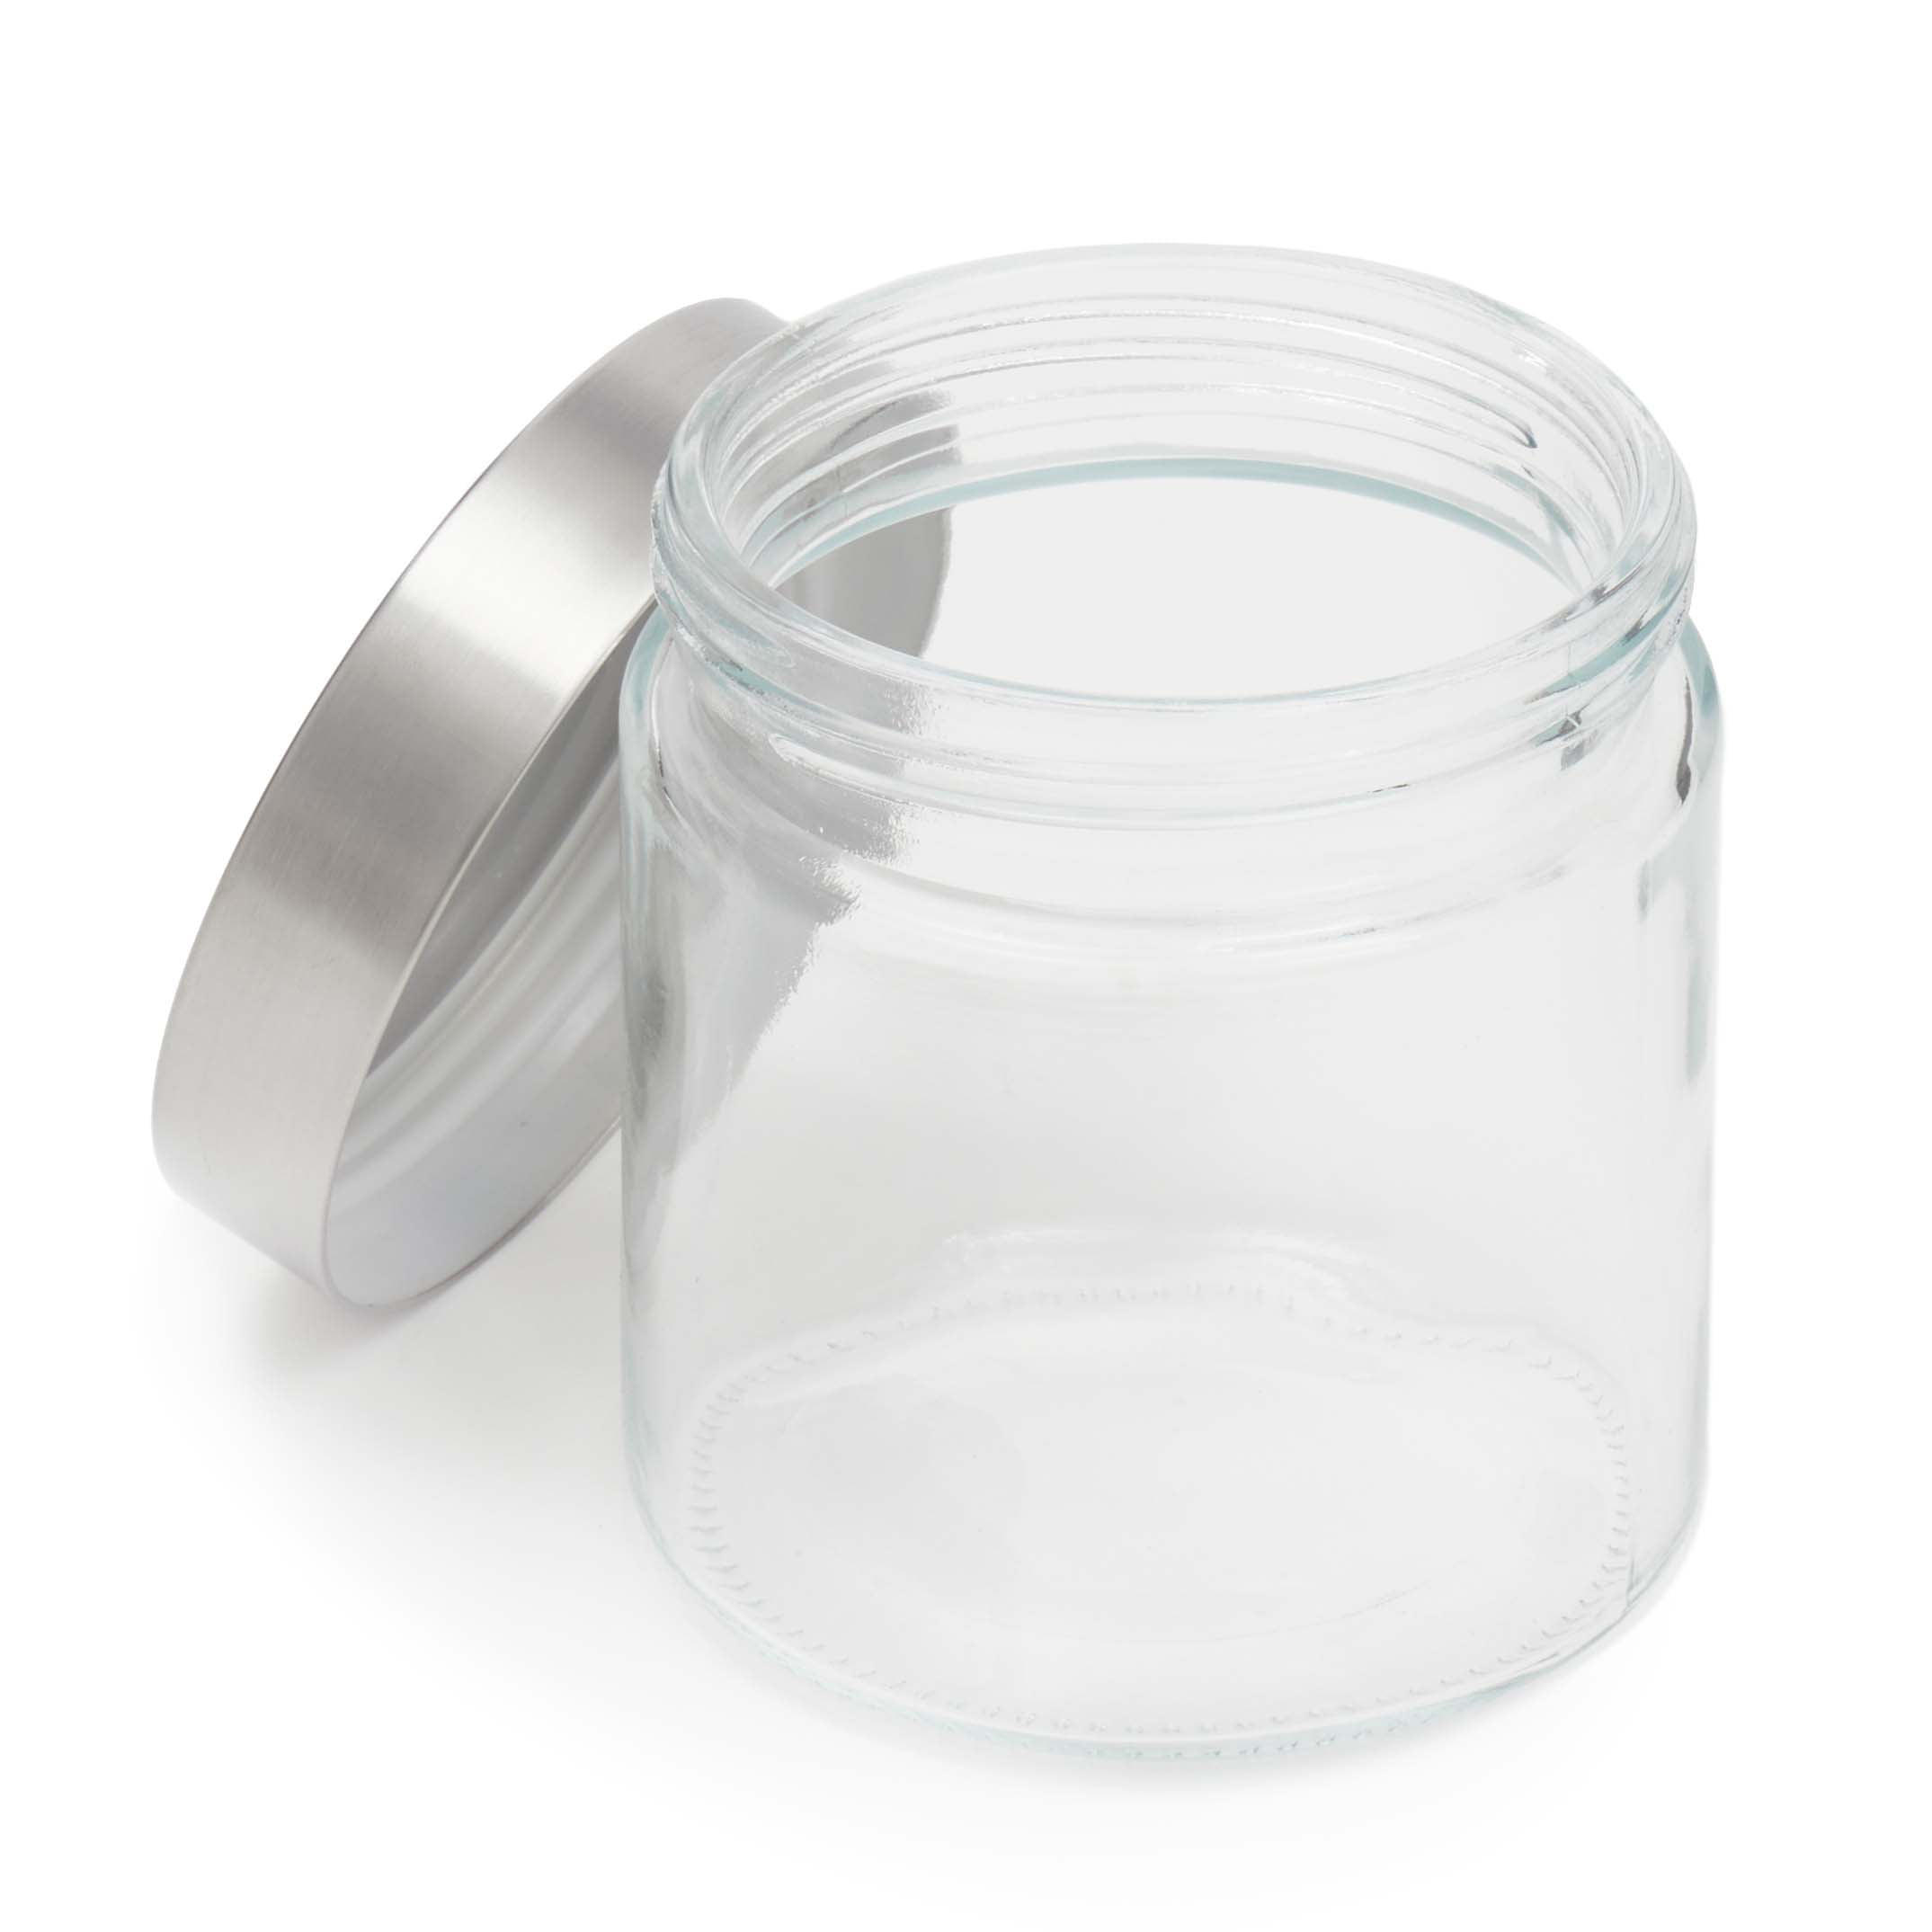 Home Basics 25 oz. Small Round Glass Canister With Stainless Steel Lid  HDC64117 - The Home Depot